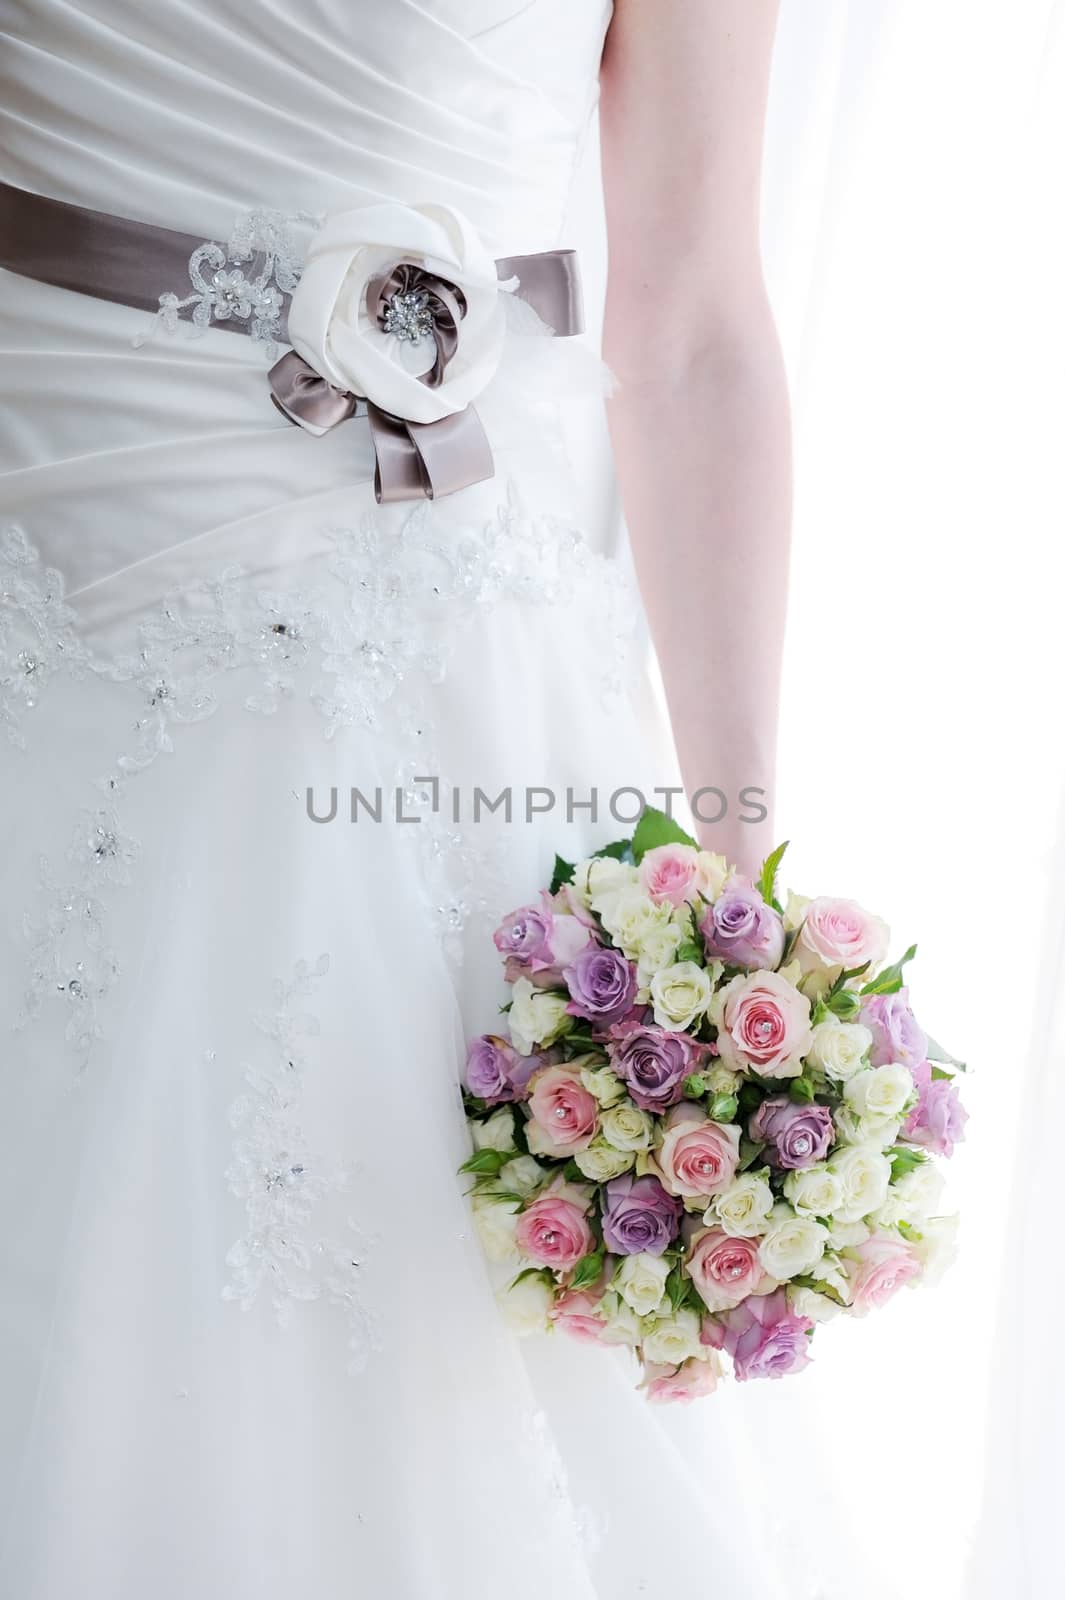 Brides dress detail and closeup of bouquet on wedding day